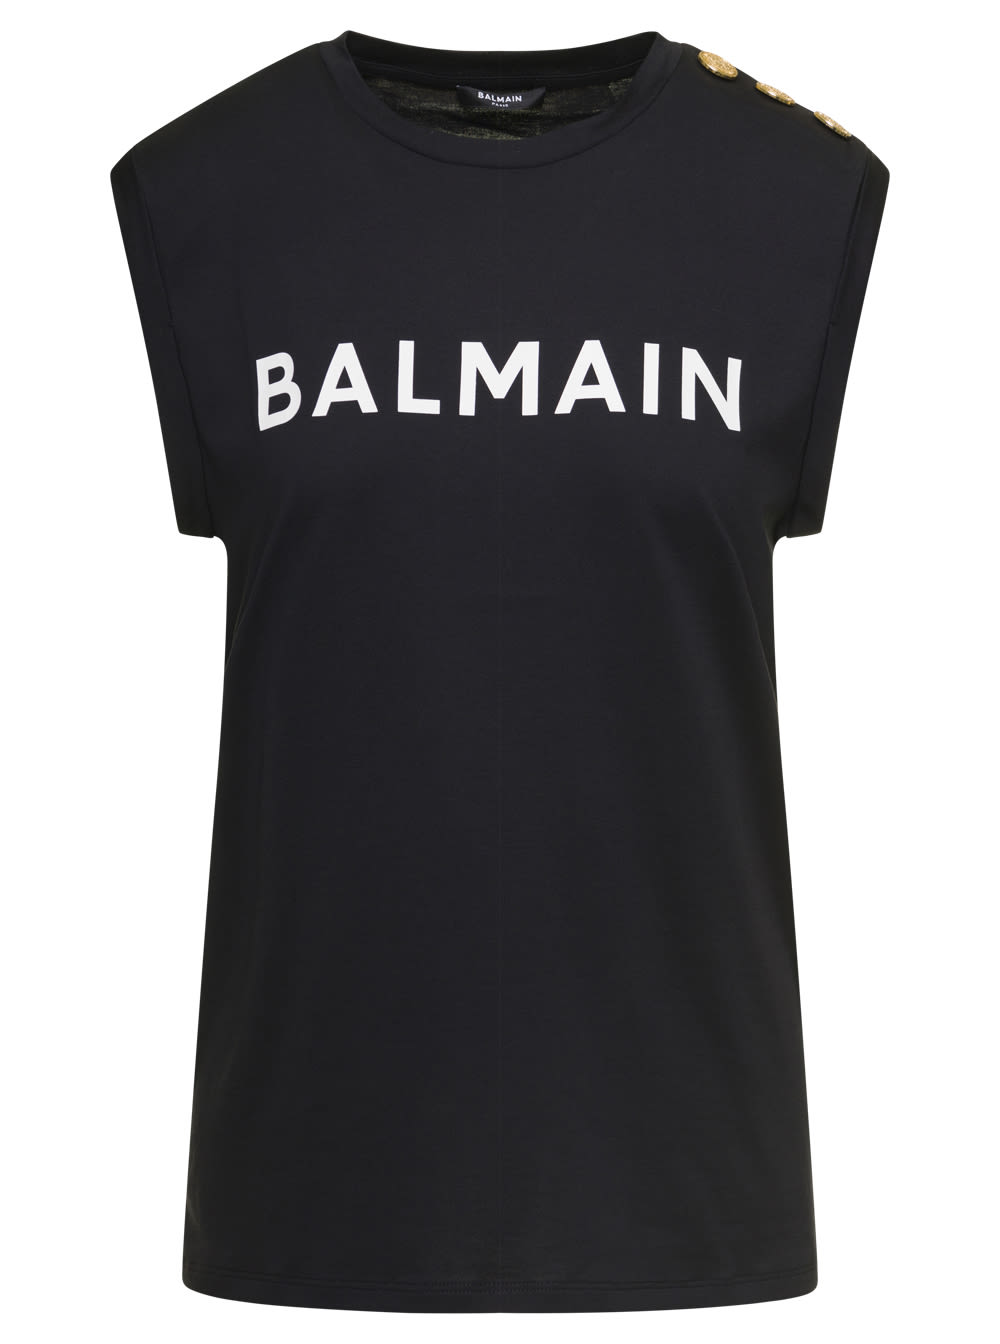 Balmain Black Tank Top With Contrasting Lettering Print And Jewel Buttons In Cotton Donna Balmain